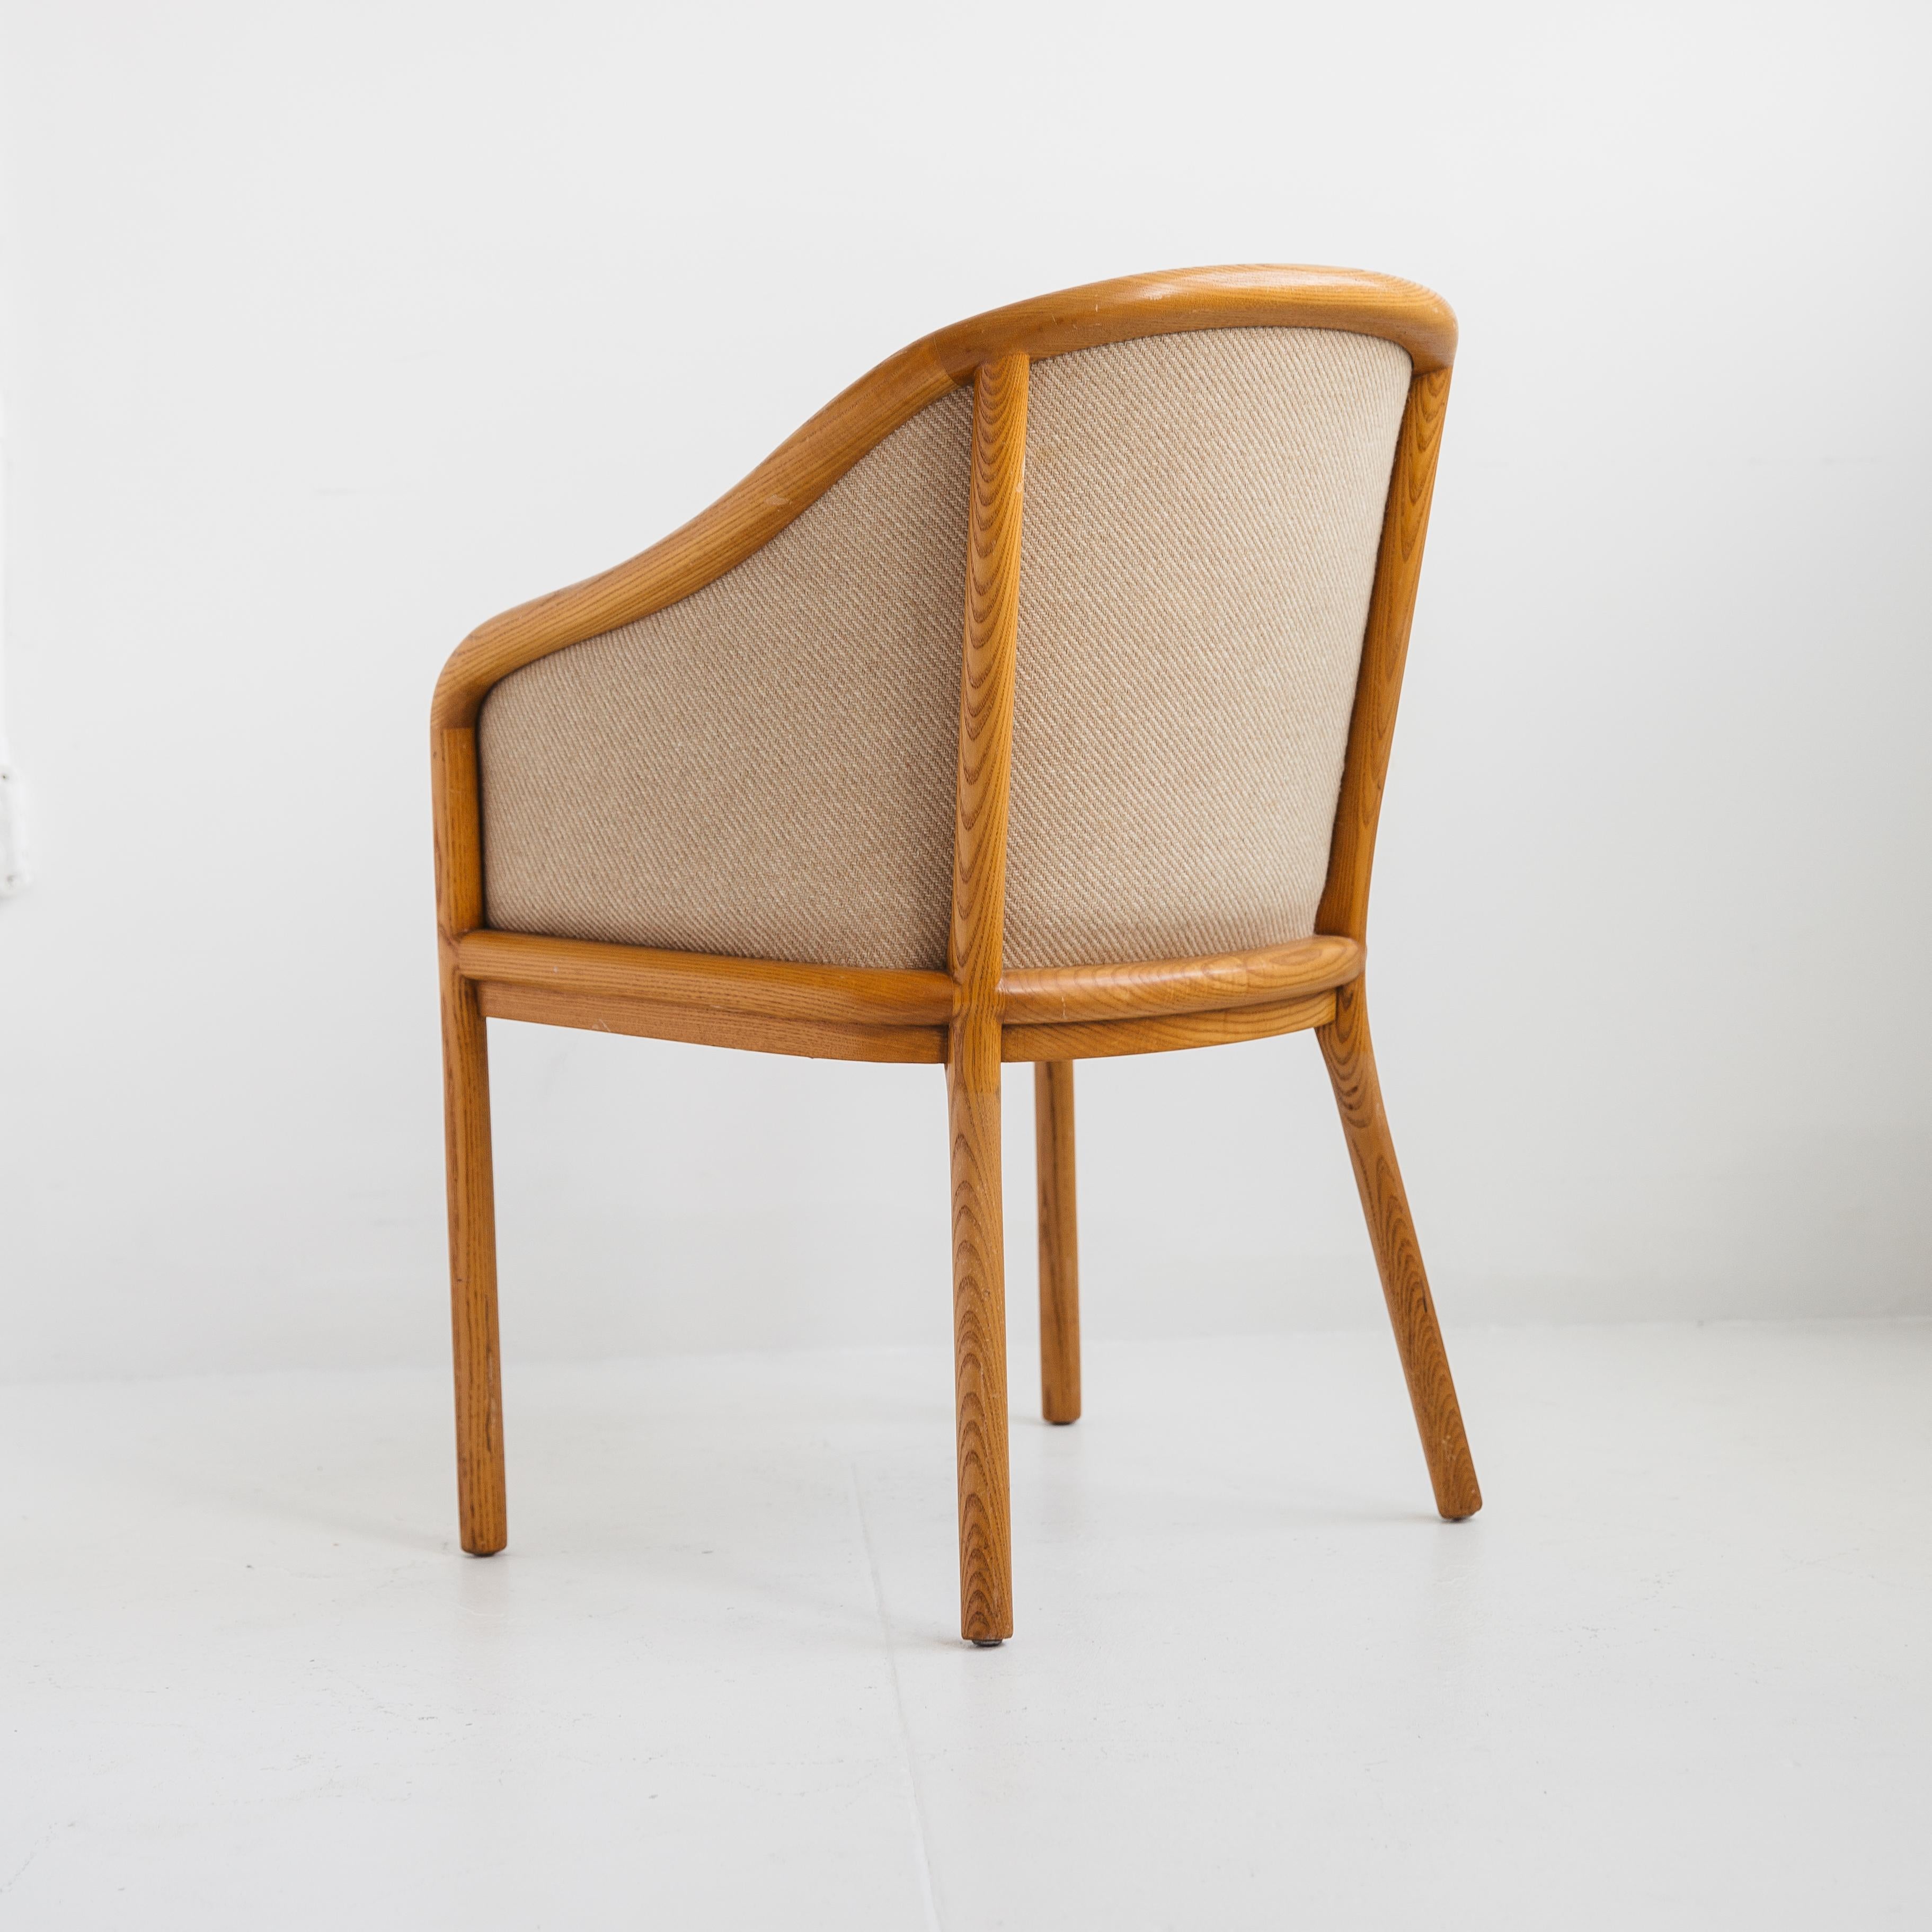 Mid-20th Century Six Vintage Upholstered Ward Bennett Dining Chairs, Mid-Century, American For Sale